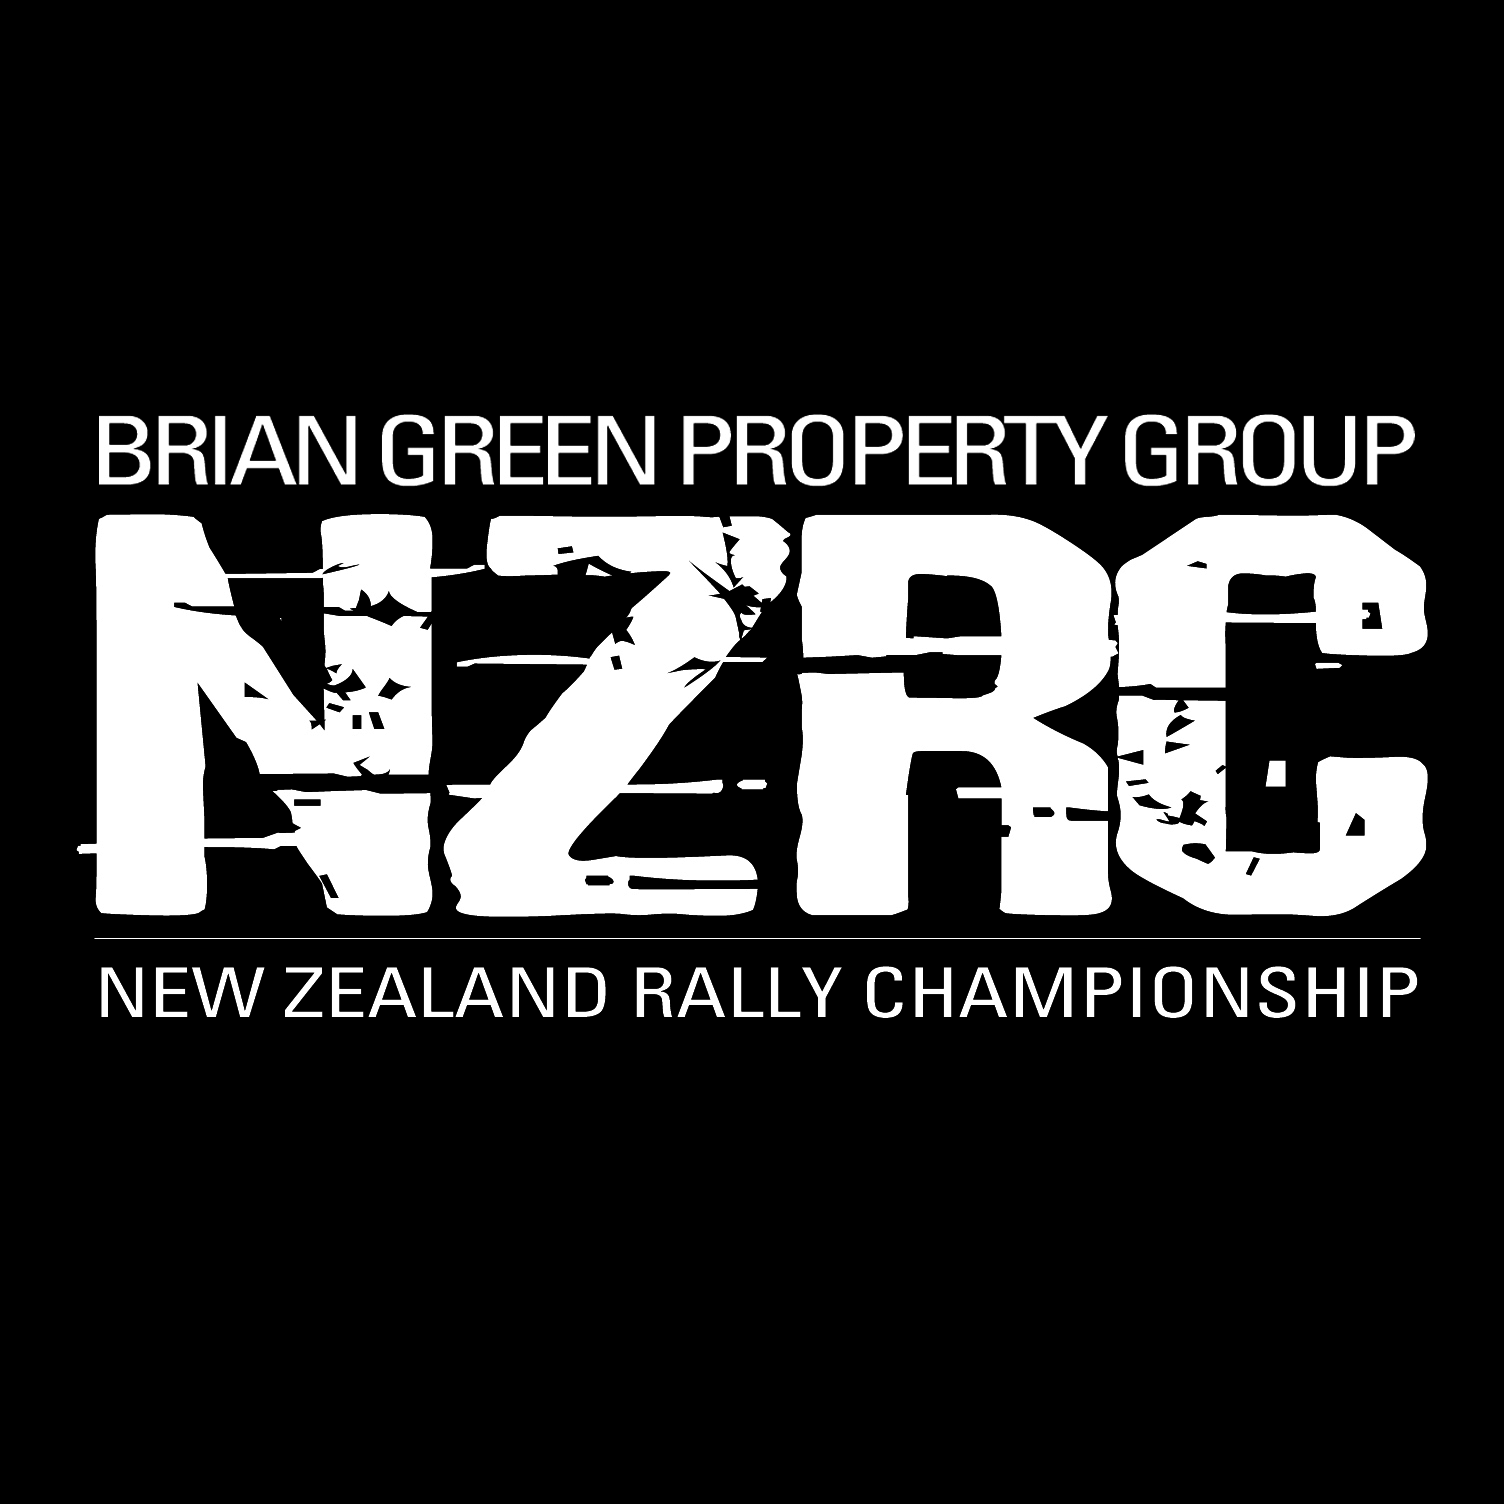 Allport to take the wheel of his R5 Fiesta | :: Brian Green Property Group New Zealand Rally Championship ::